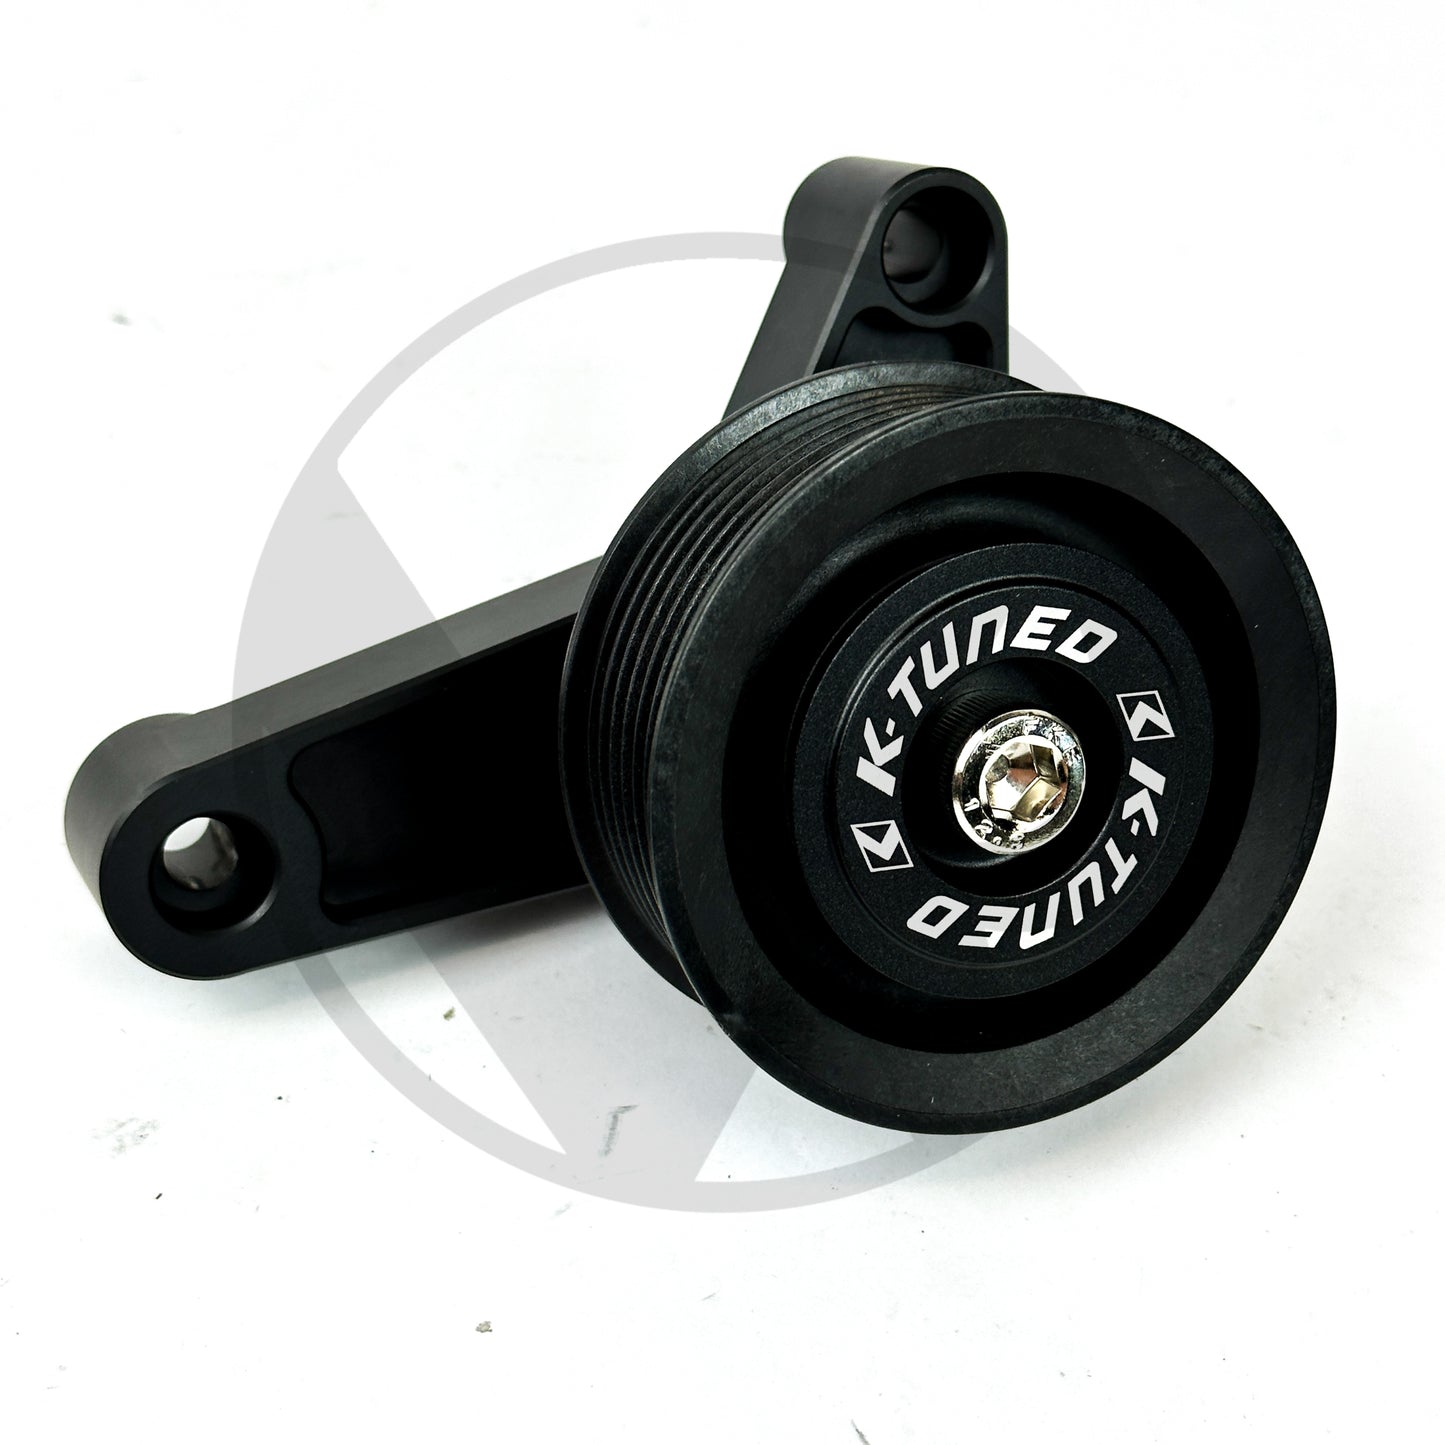 K Tuned Adjustable Pulley Kit for Honda Civic Si EP3